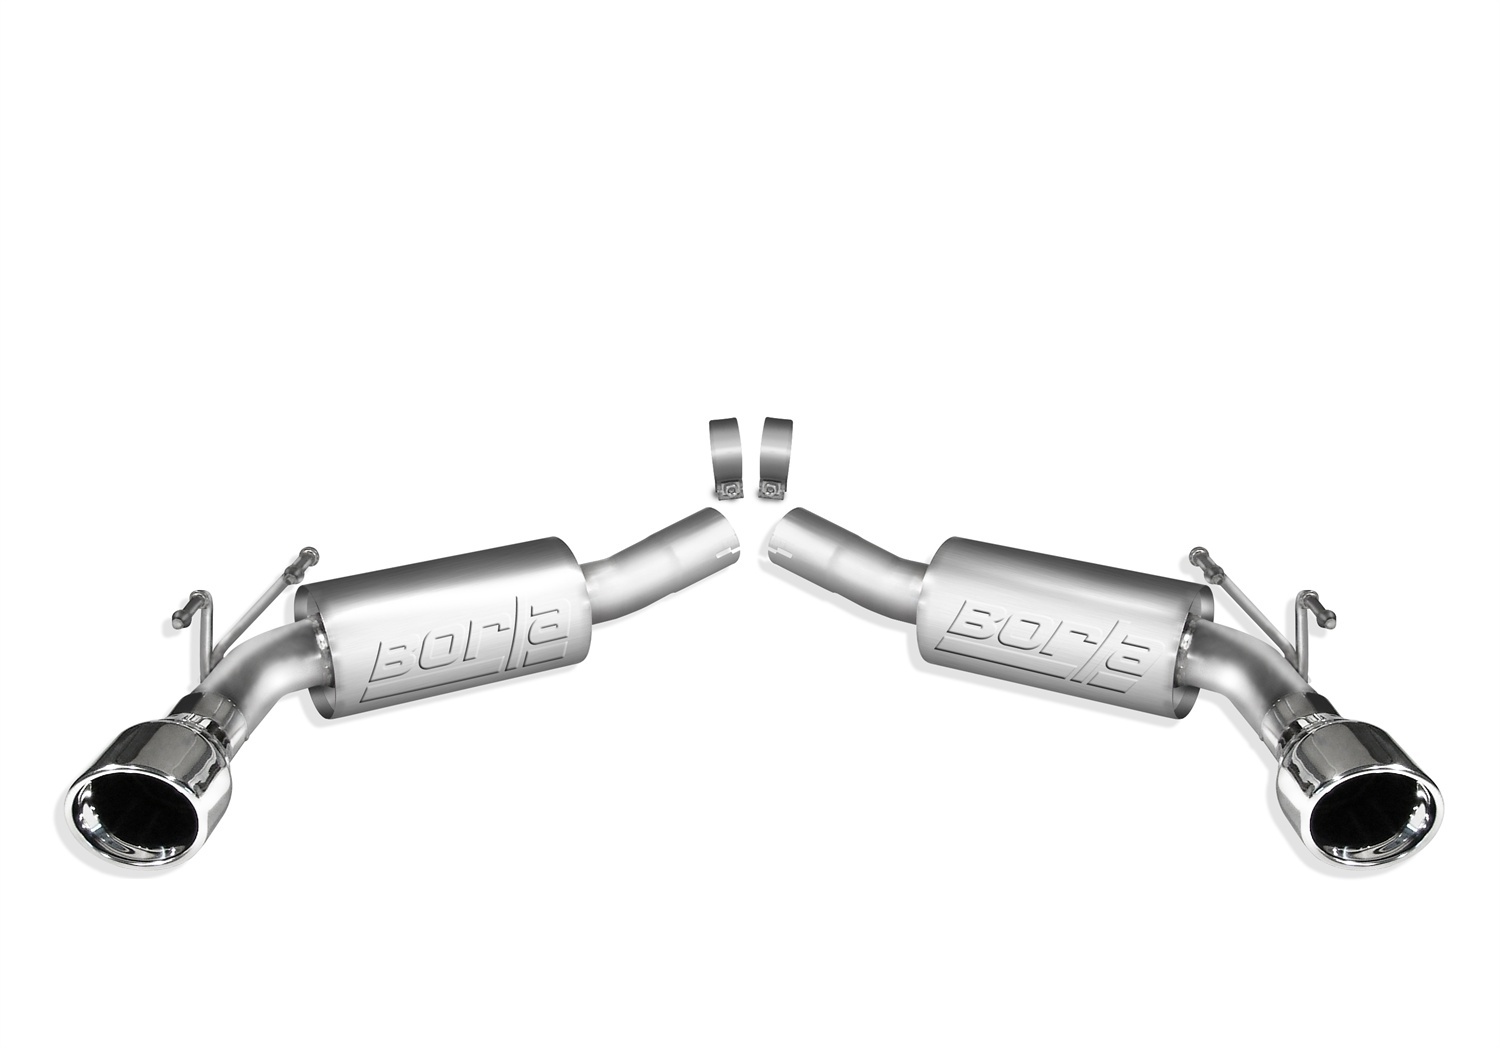 Borla Exhaust System, S-Type, Axle-Back, 2-1/2" Tailpipe, 4-1/2" Tips, Stainless, Natural, Chevy Corvette 1984-91, K